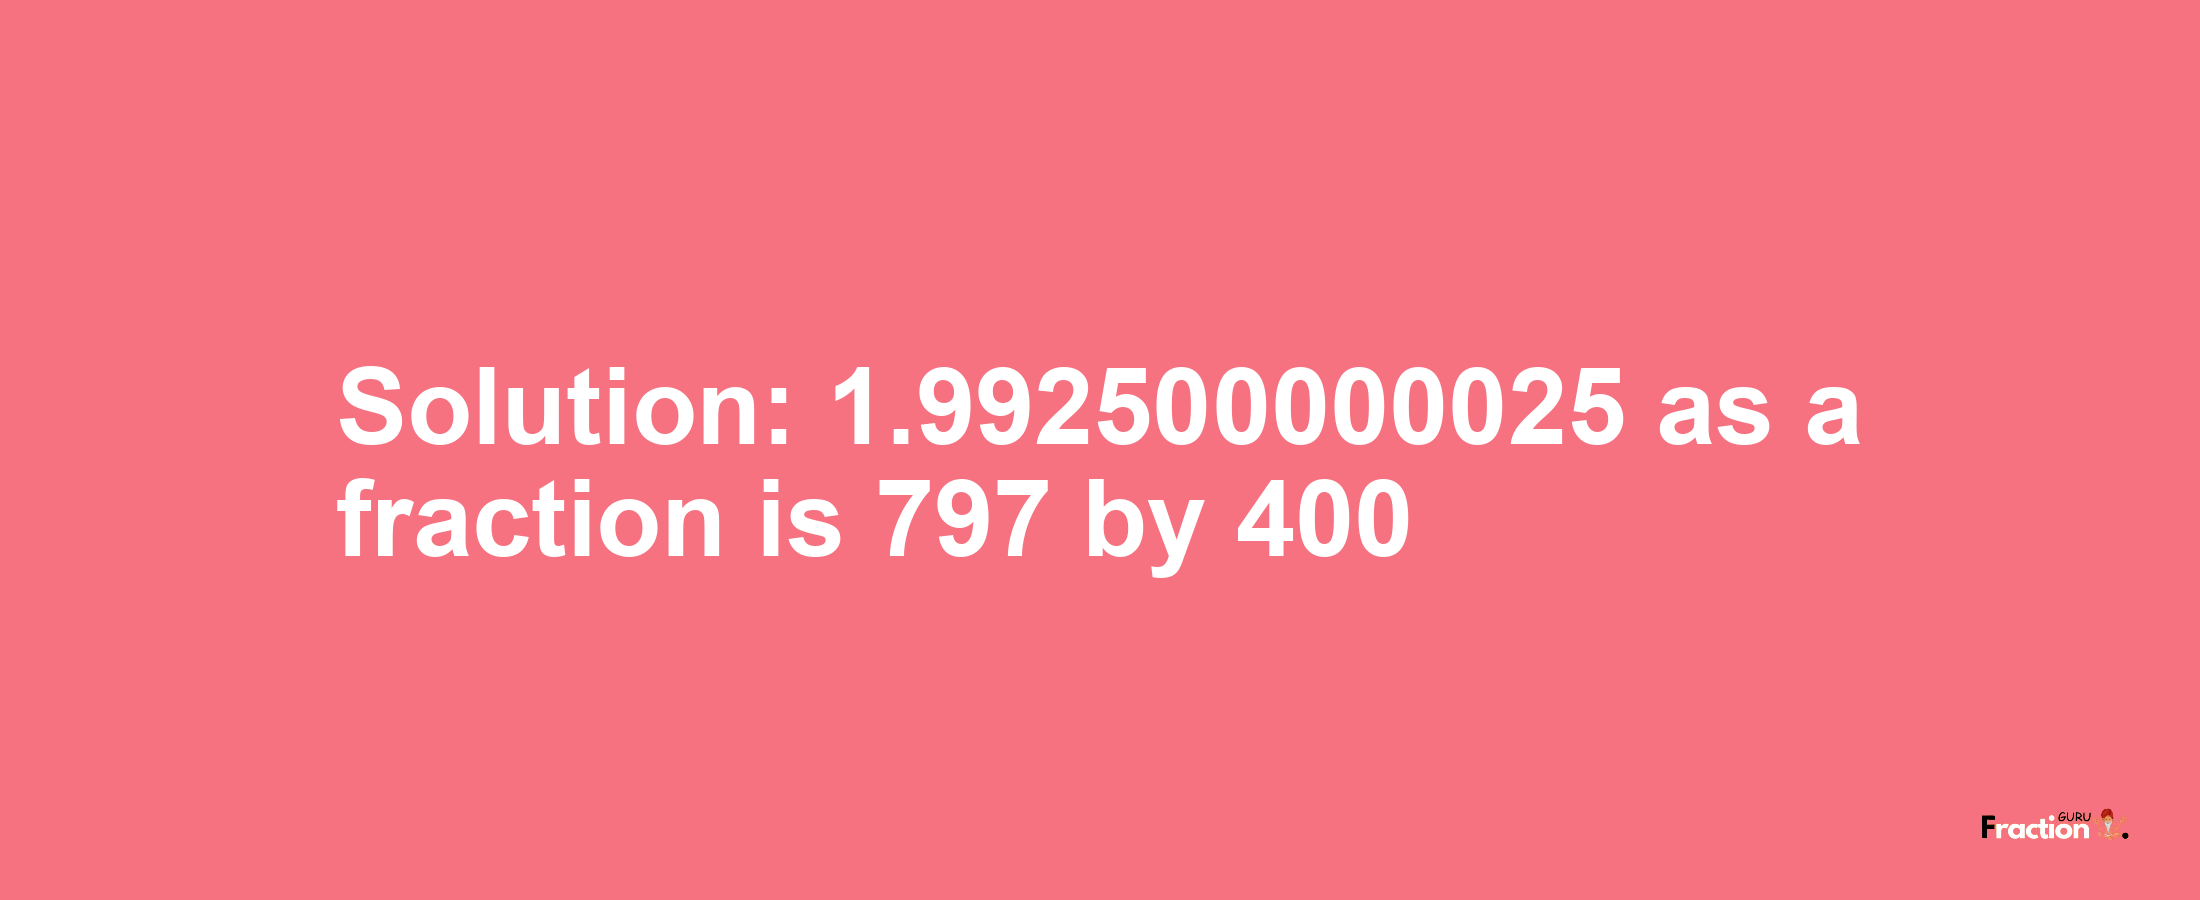 Solution:1.992500000025 as a fraction is 797/400